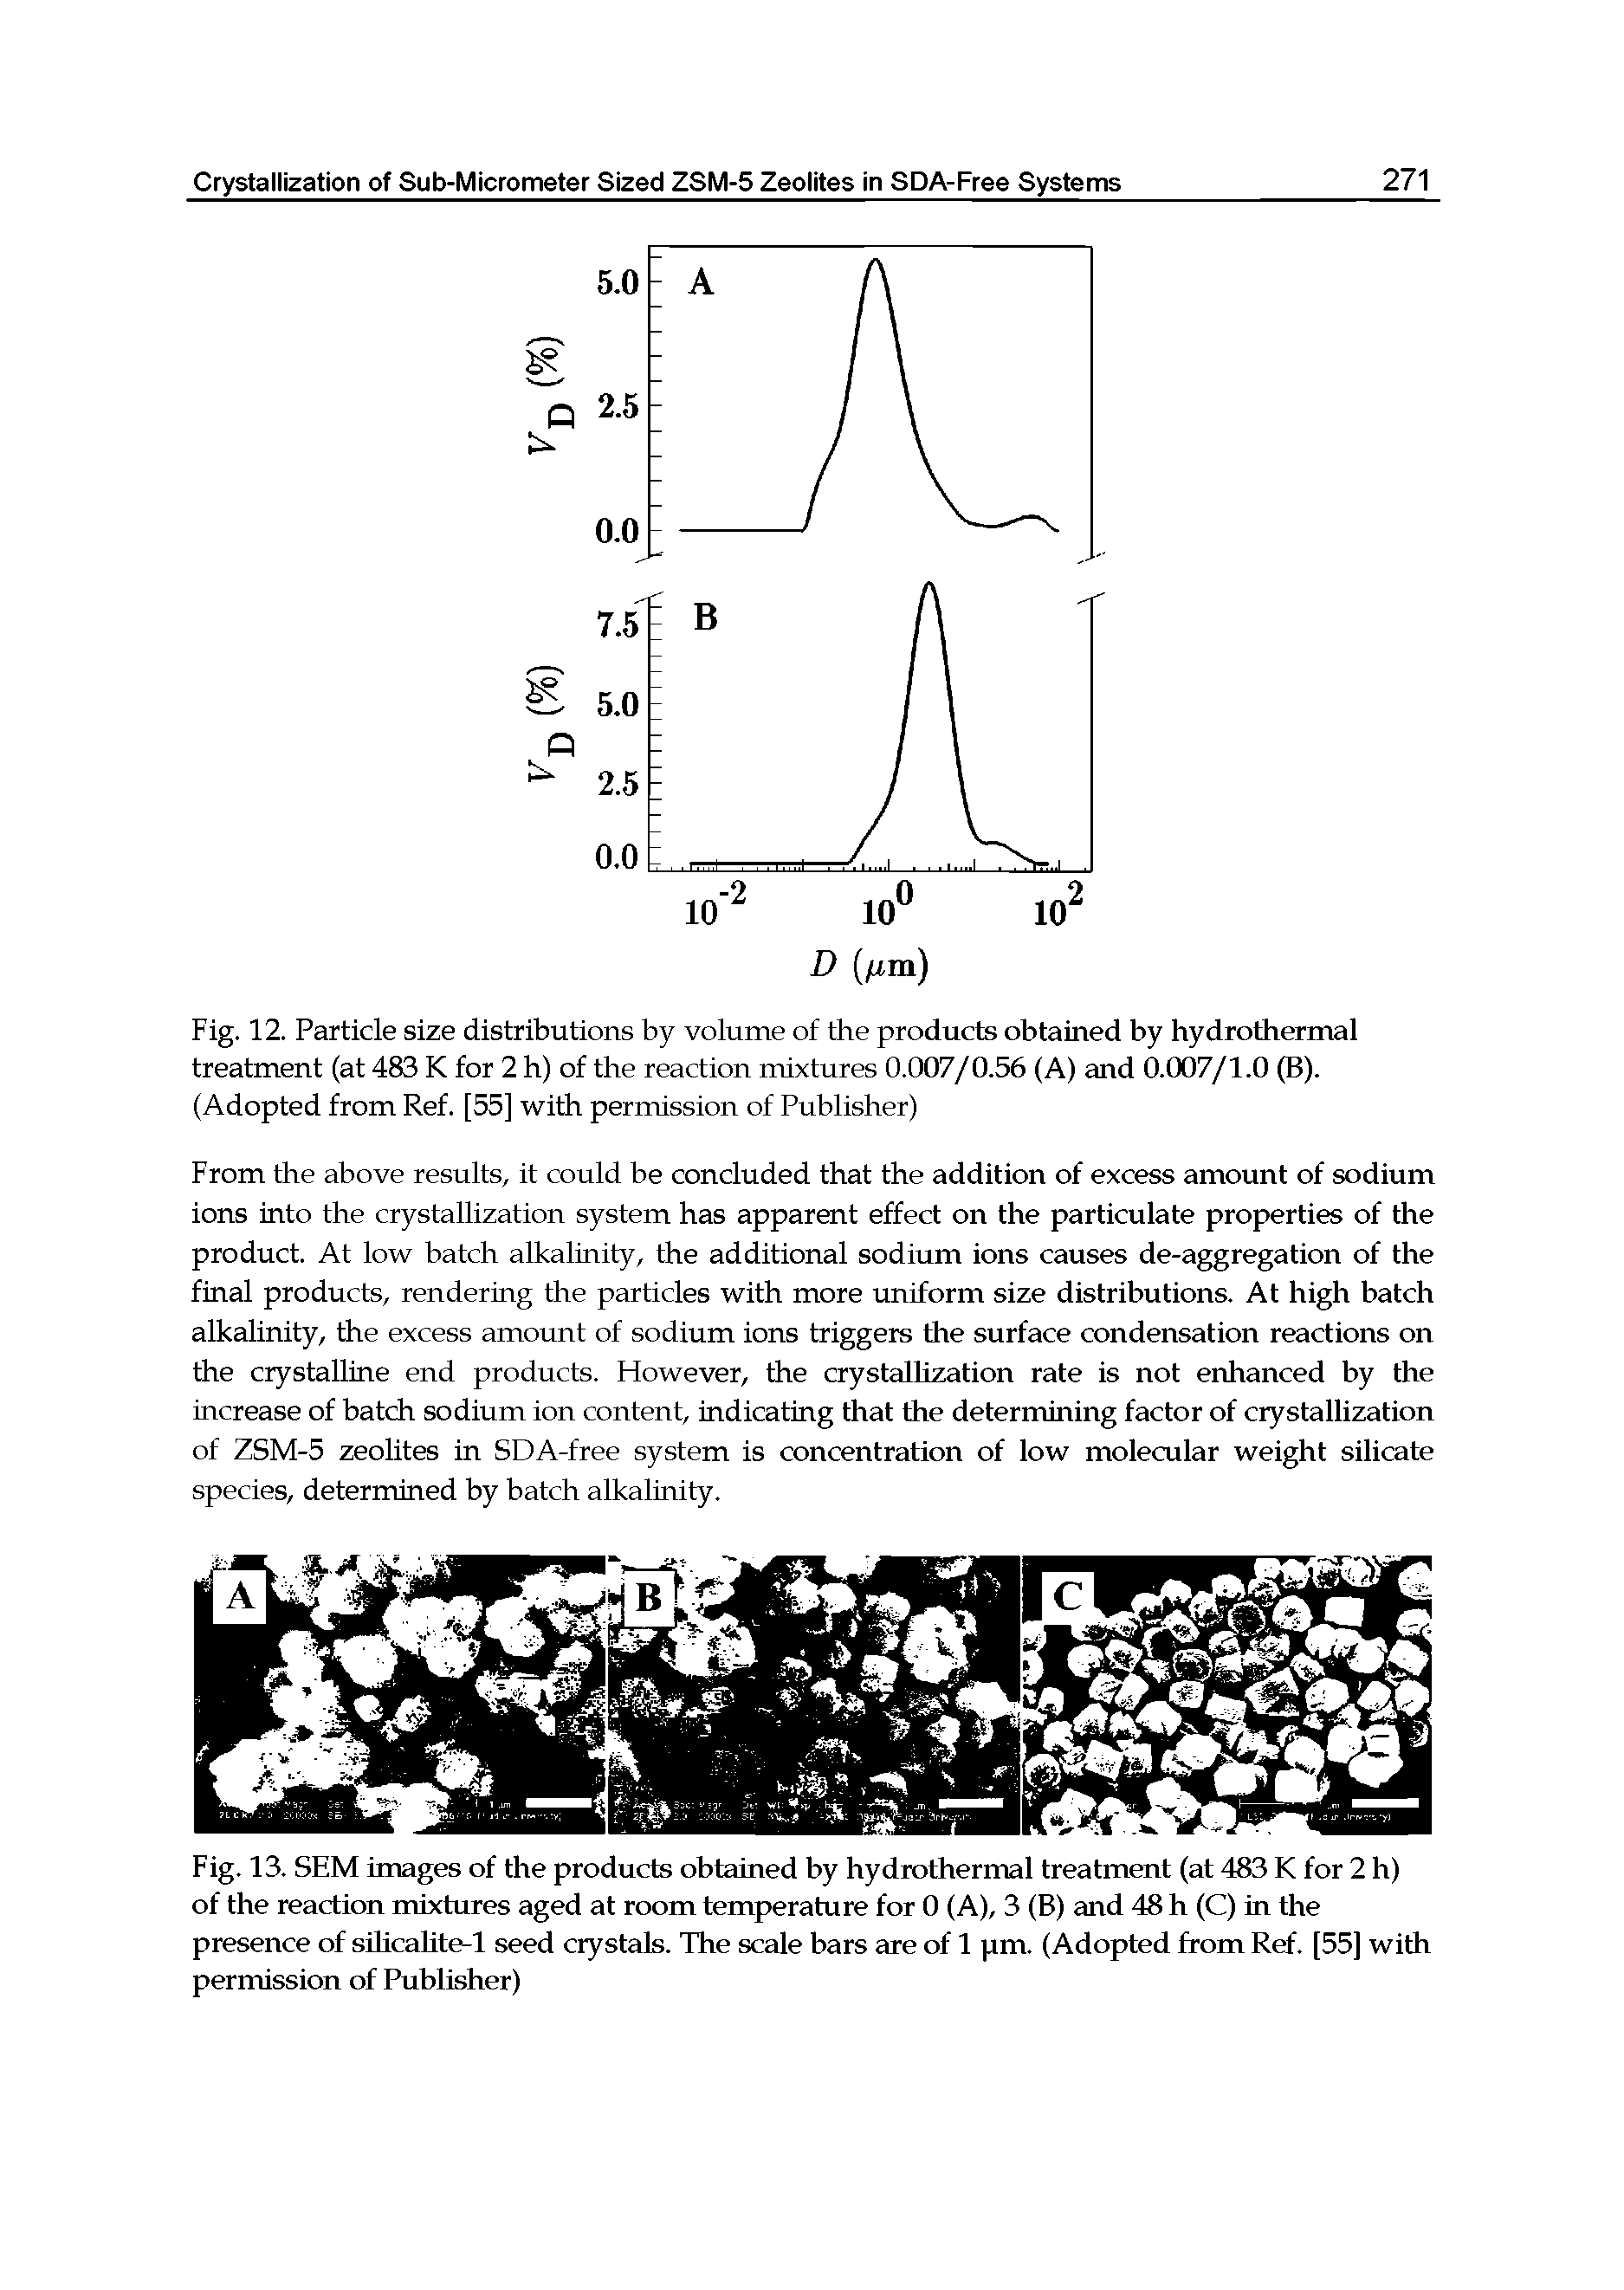 Fig. 12. Particle size distributions by volume of the products obtained by hydrothermal treatment (at 483 K for 2 h) of the reaction mixtures 0.007/0.56 (A) and 0.007/1.0 (B). (Adopted from Ref. [55] with permission of Publisher)...